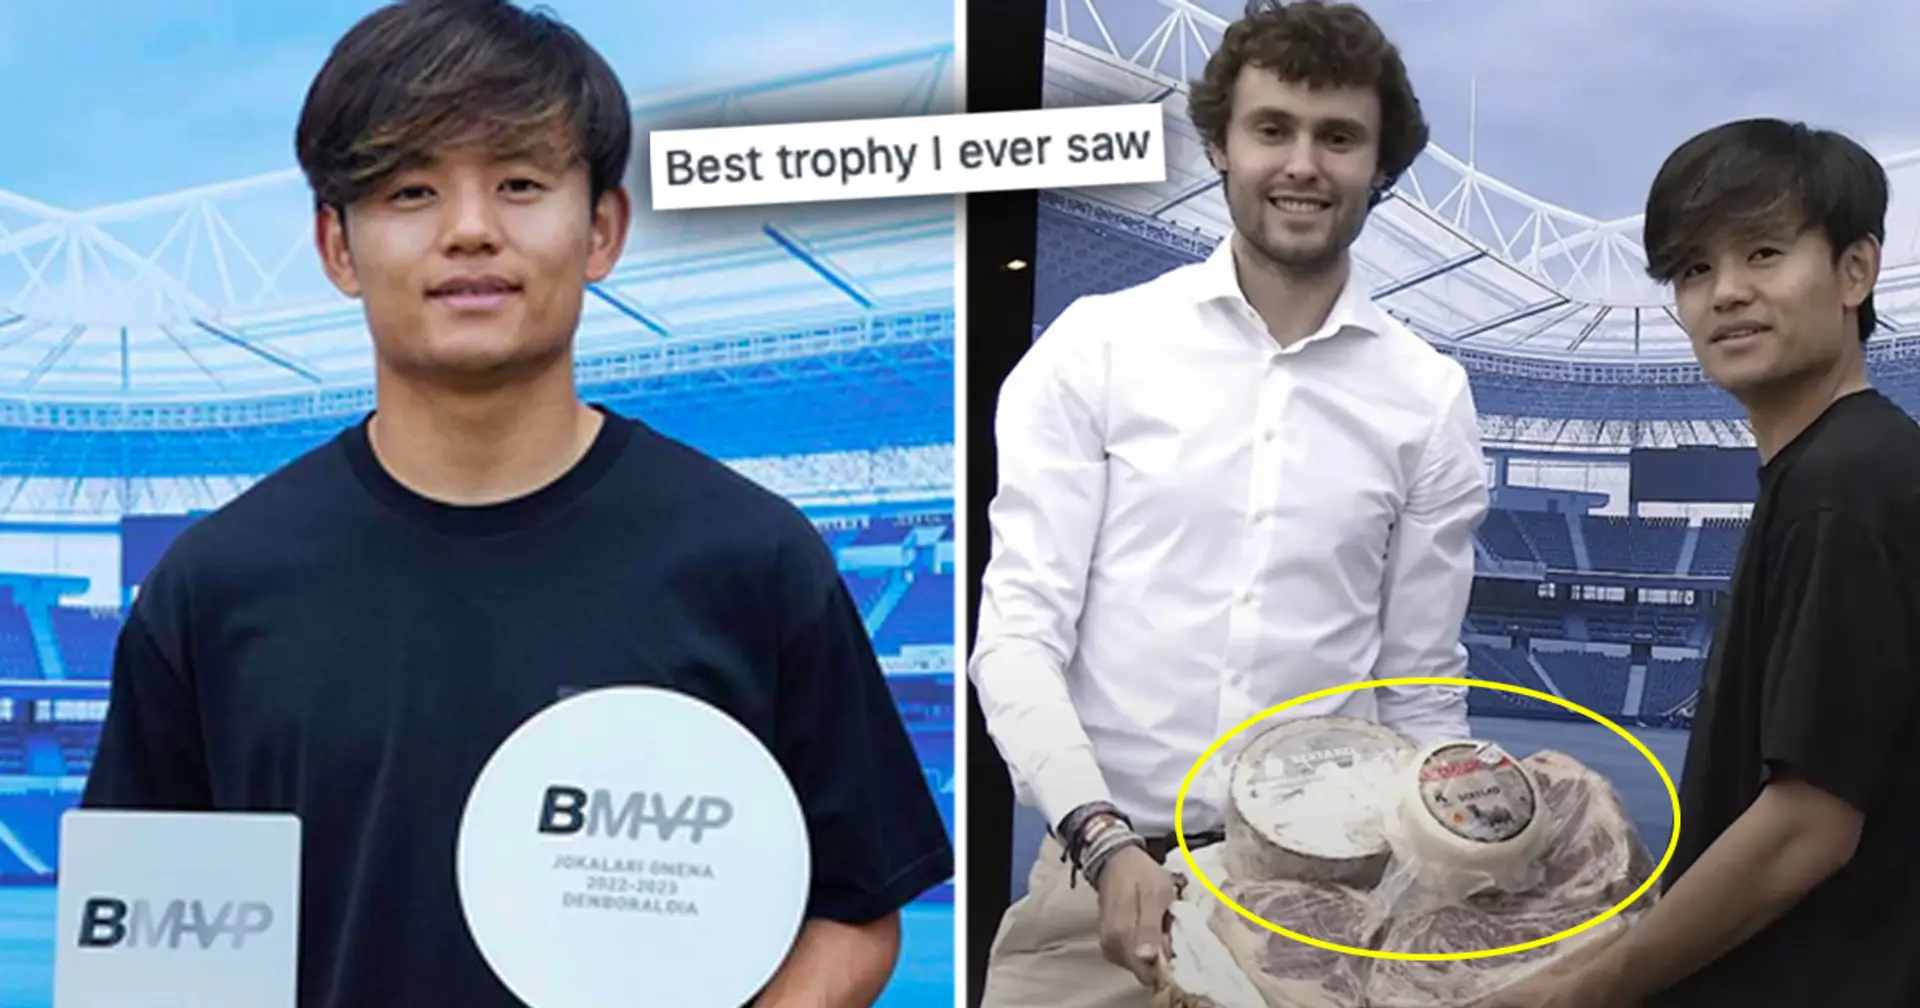 Why did Kubo receive meat as Real Sociedad Player of the Season award? Answered